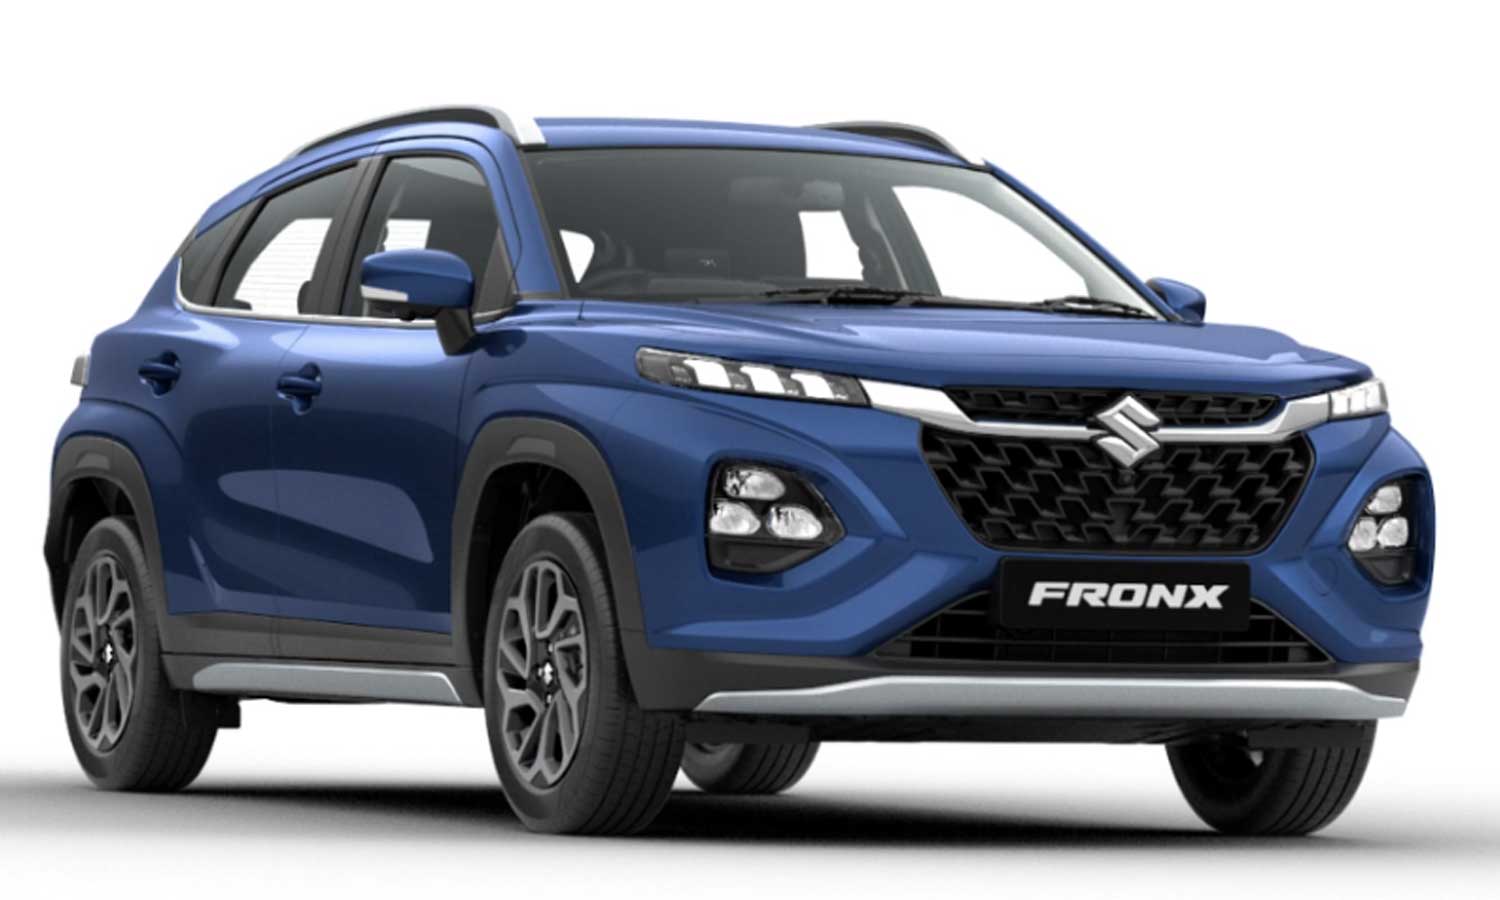 Amazing Maruti Suzuki Fronx on pre-order – Do you know when it will be released?